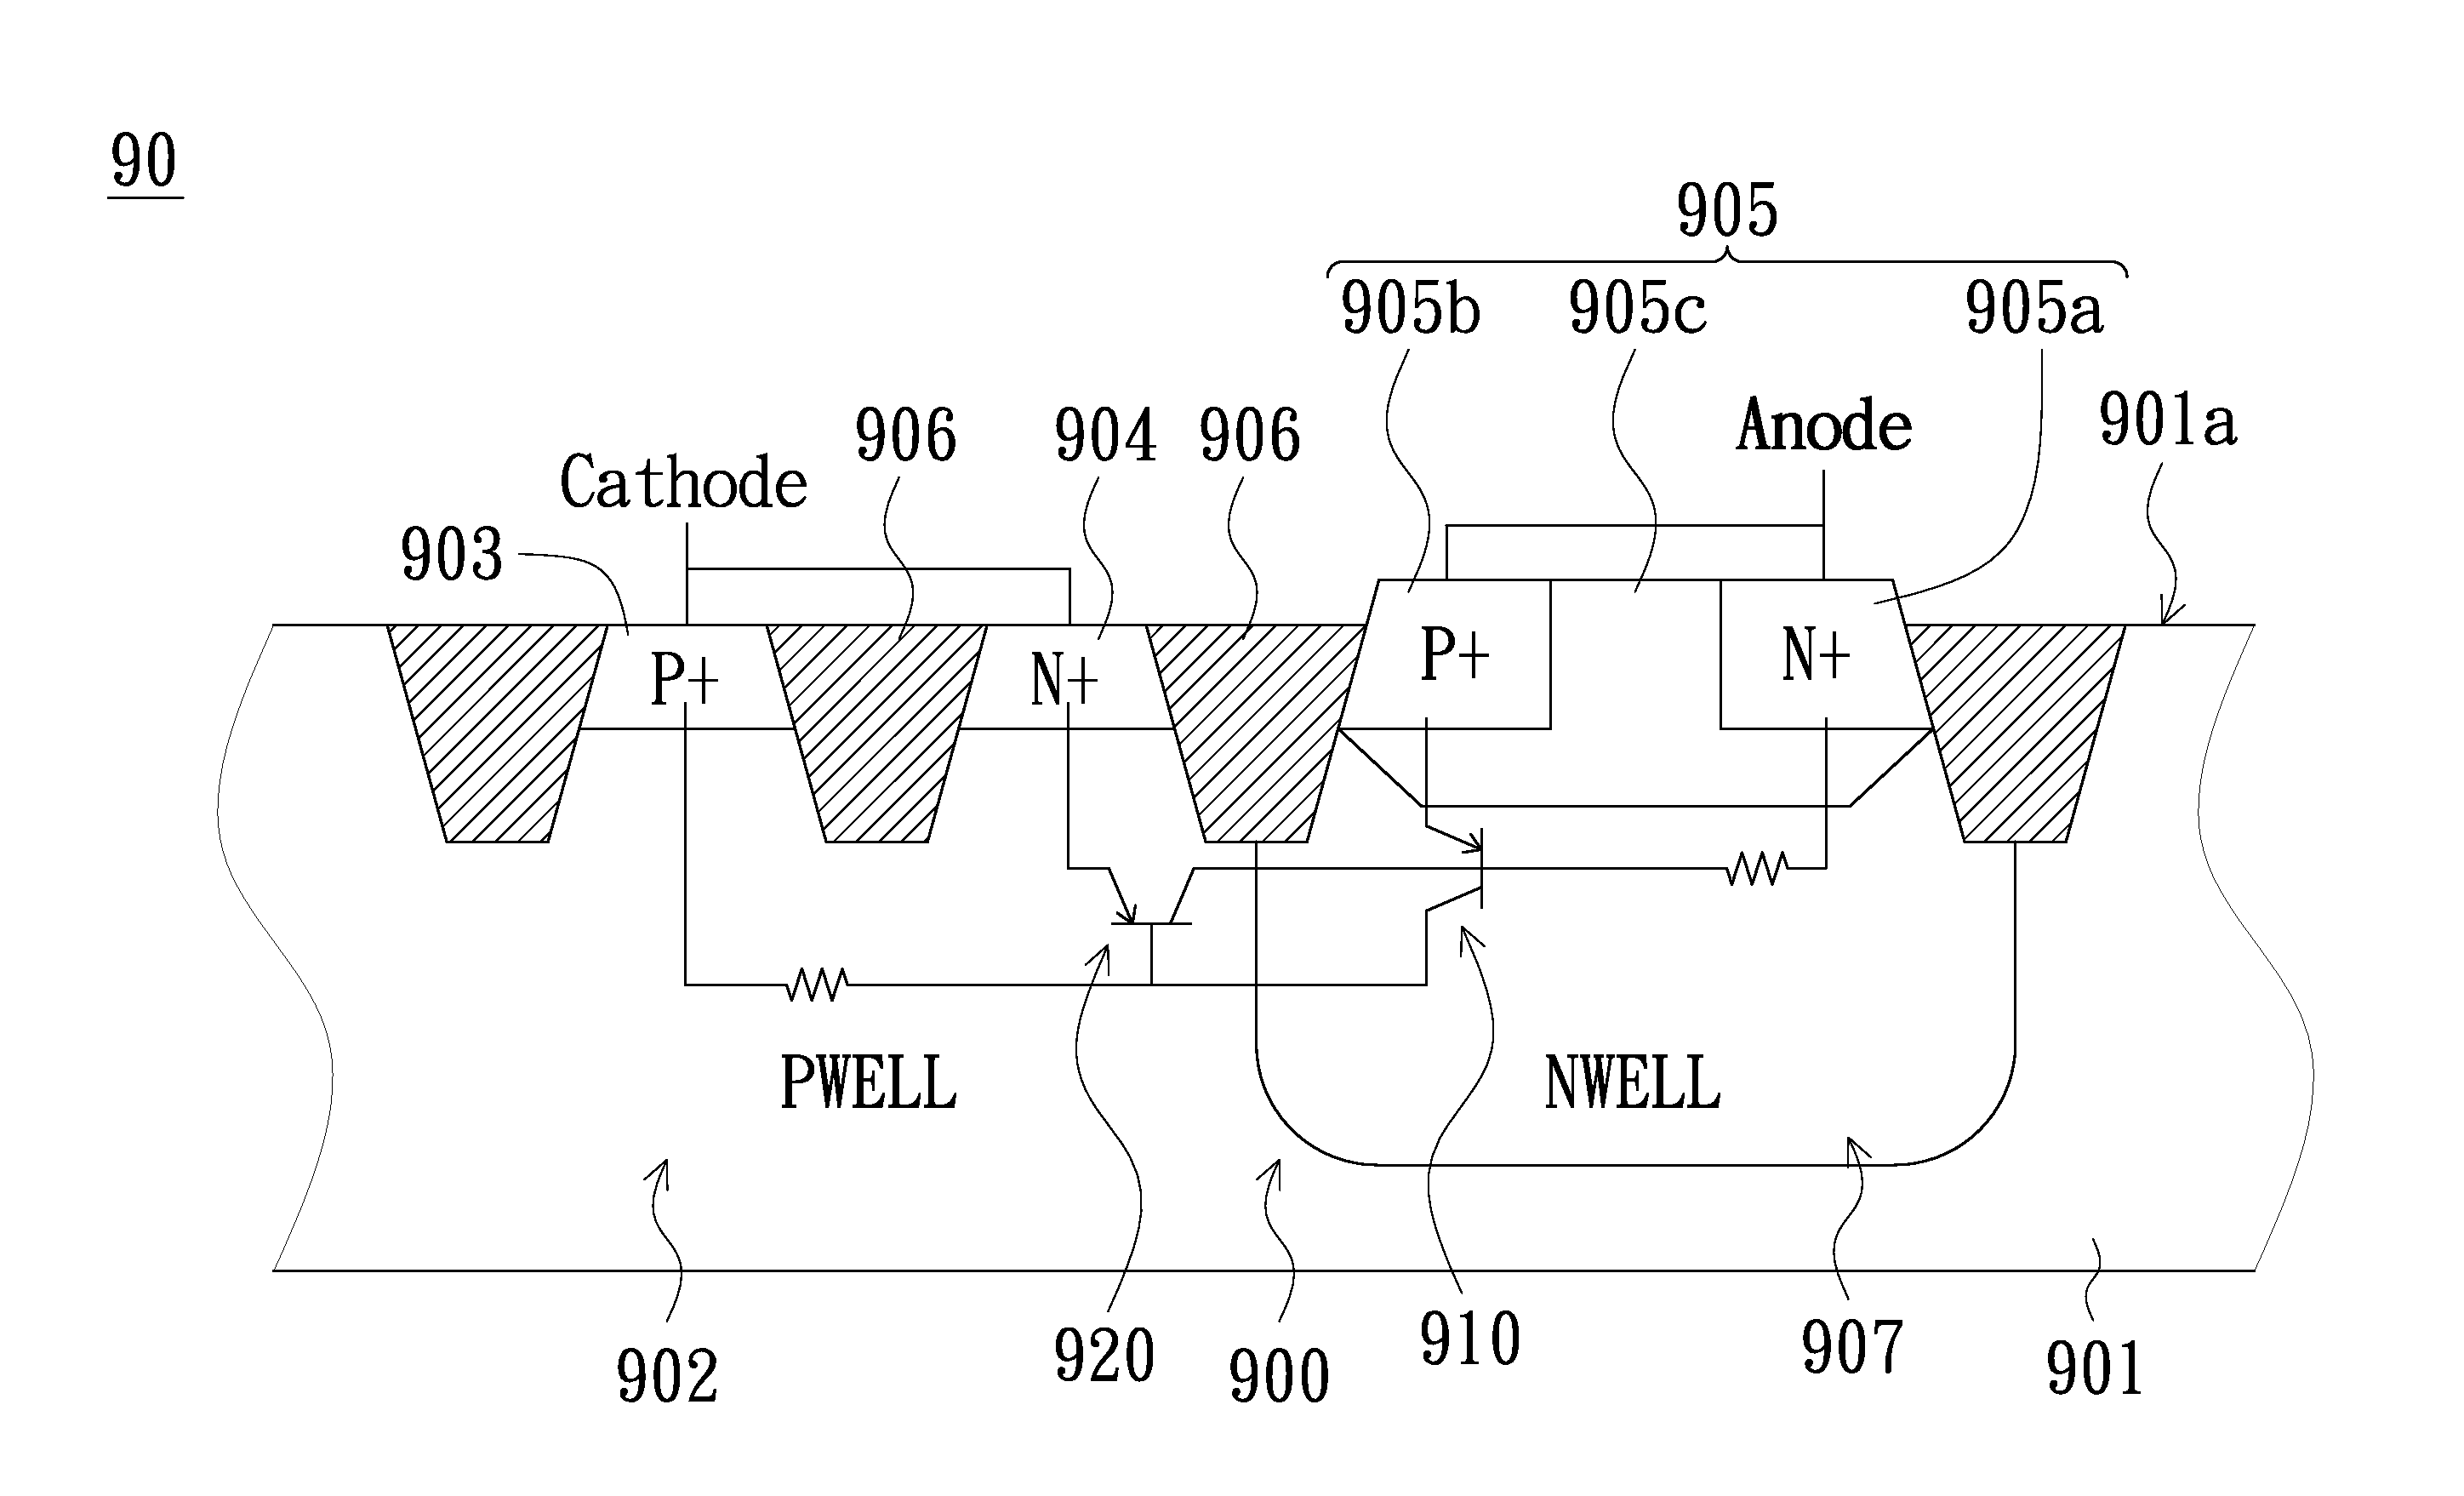 Electrostatic discharge protection apparatus